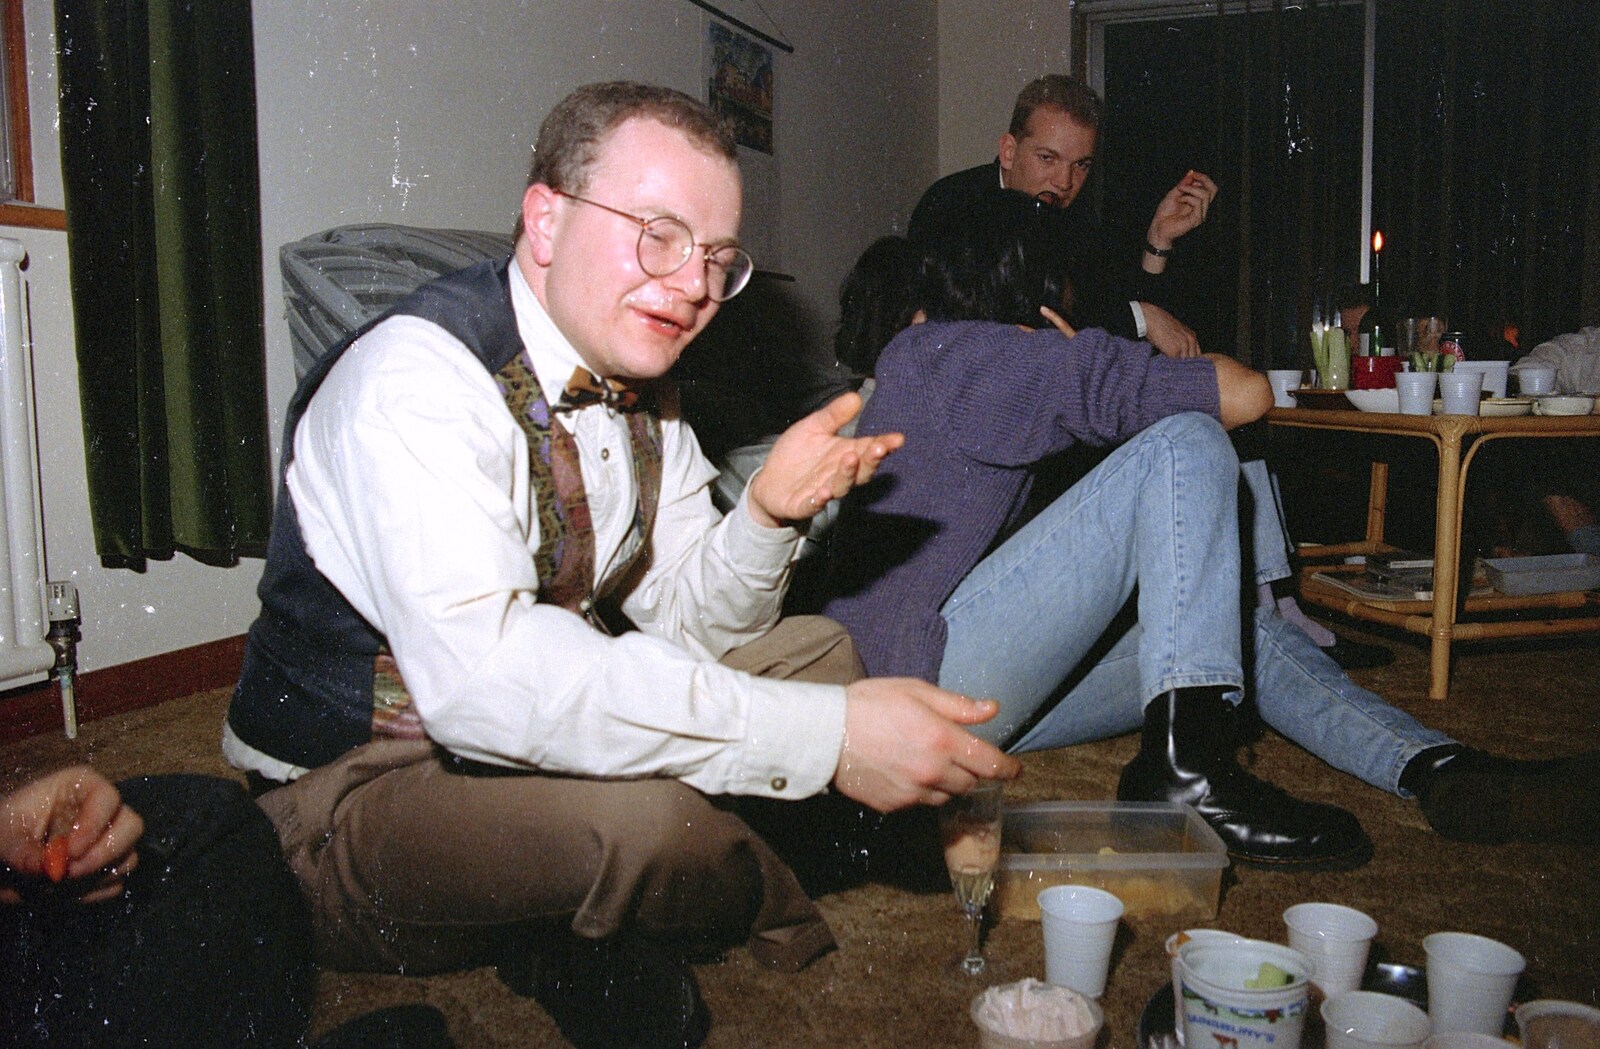 Hamish's Oxford Party, Oxfordshire - 25th April 1992: Hamish tips drink all over his face